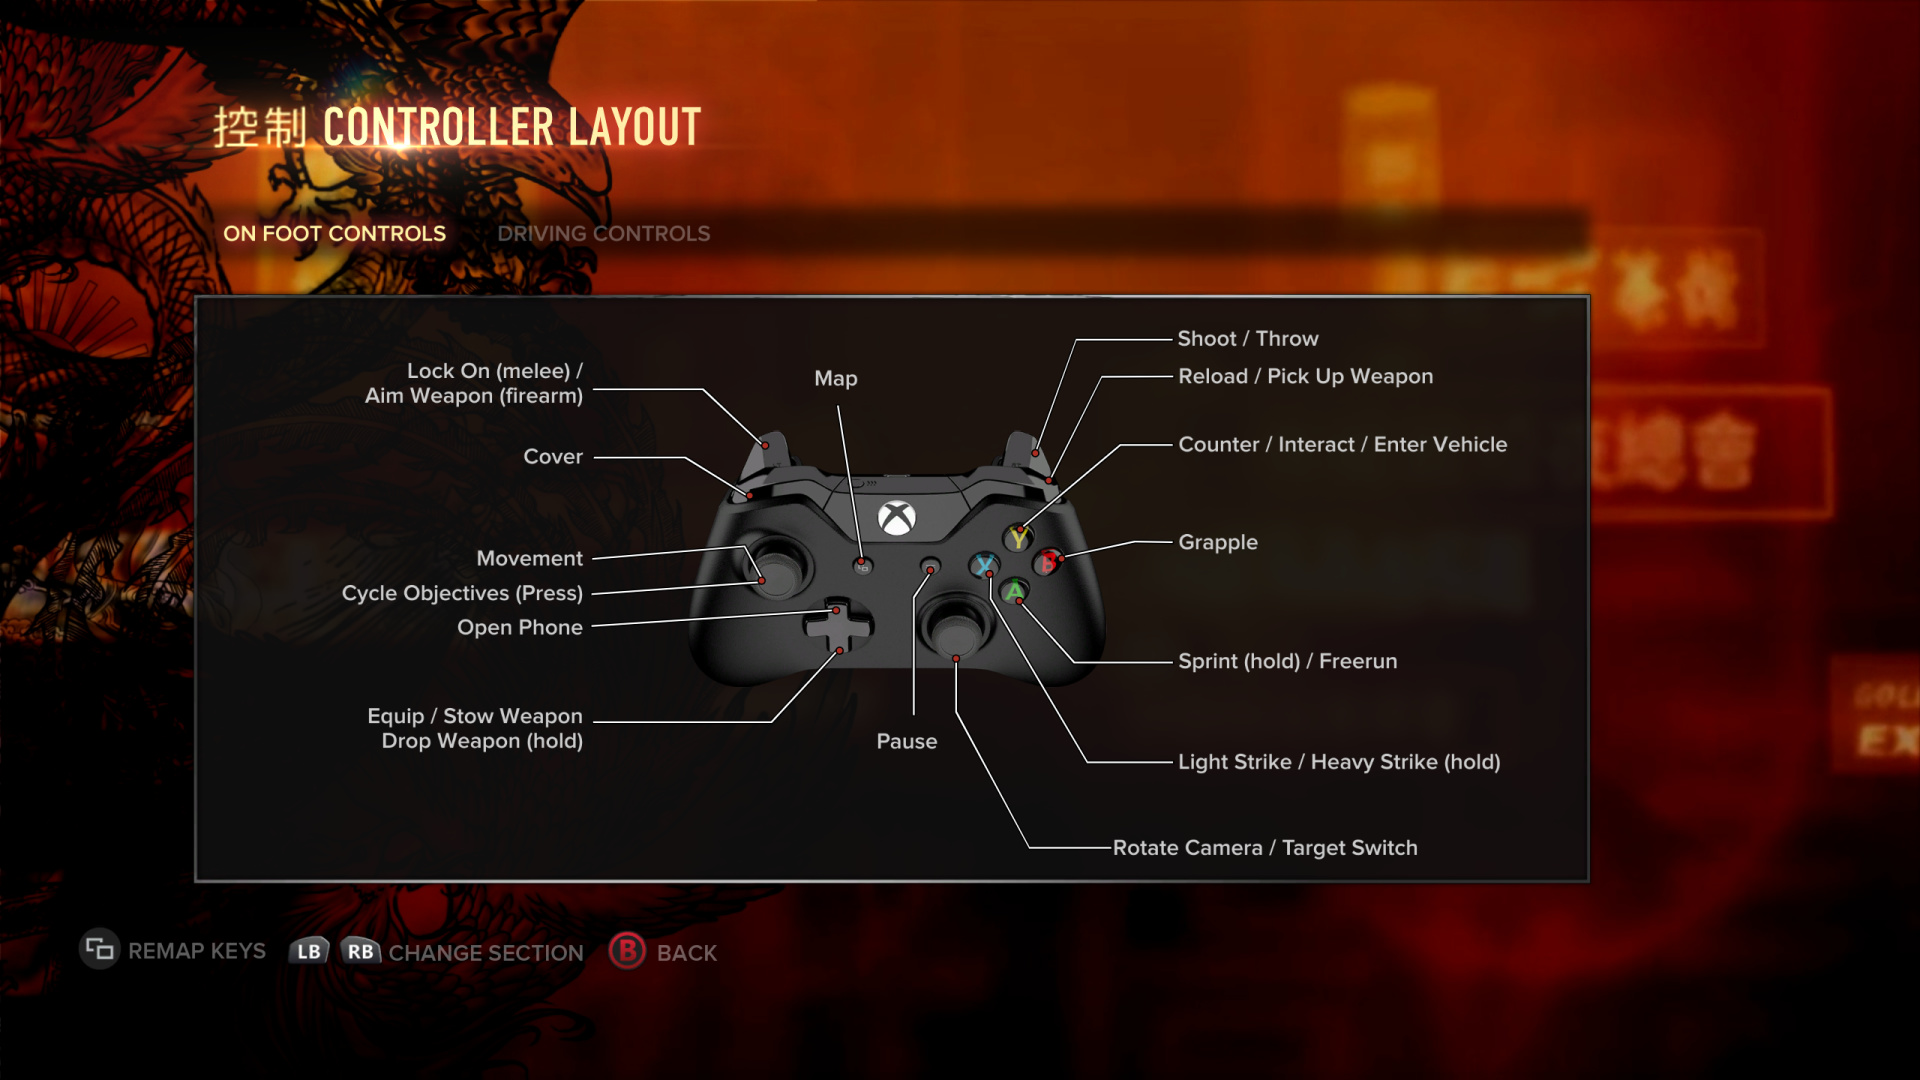 Sleeping Dogs Compatible Modded Controllers